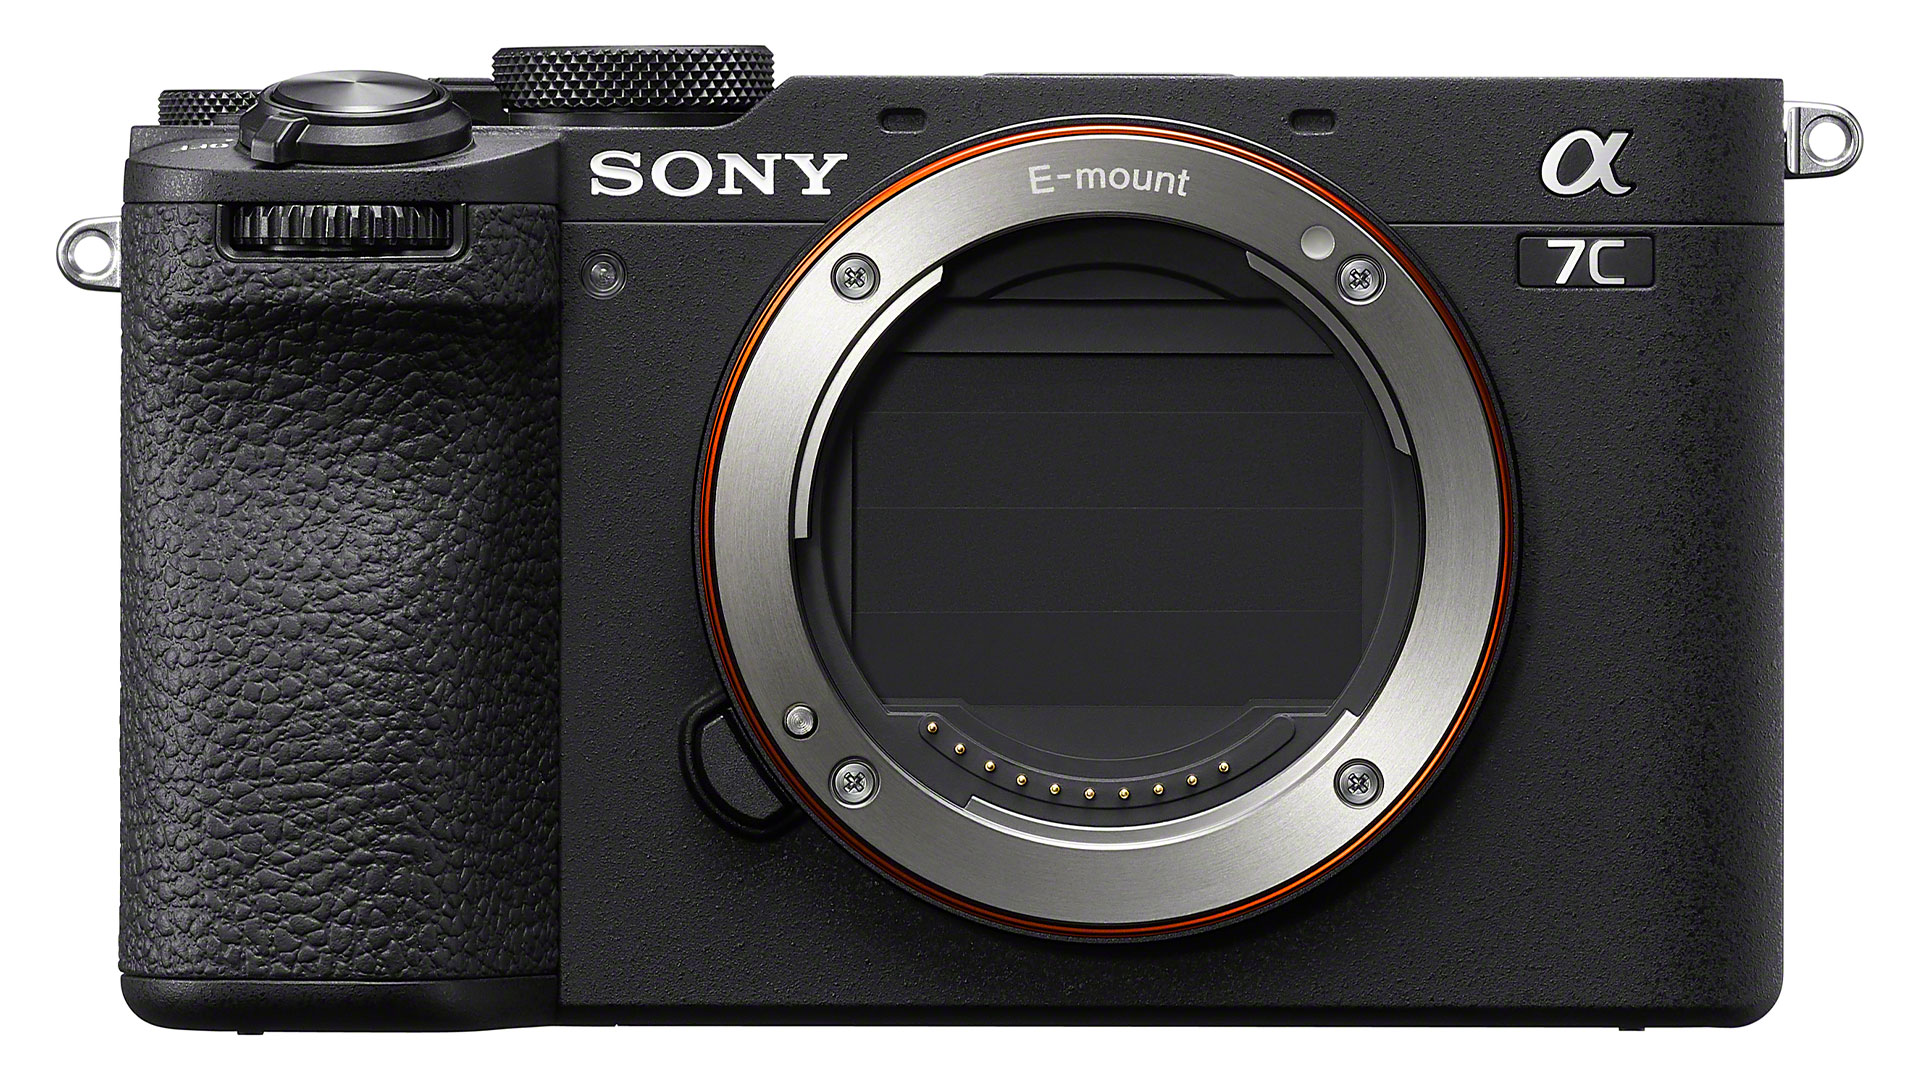 Sony a7C II Announced – New Compact Full Frame Camera with 33MP, 10-Bit  4K60 Super35 Video and More